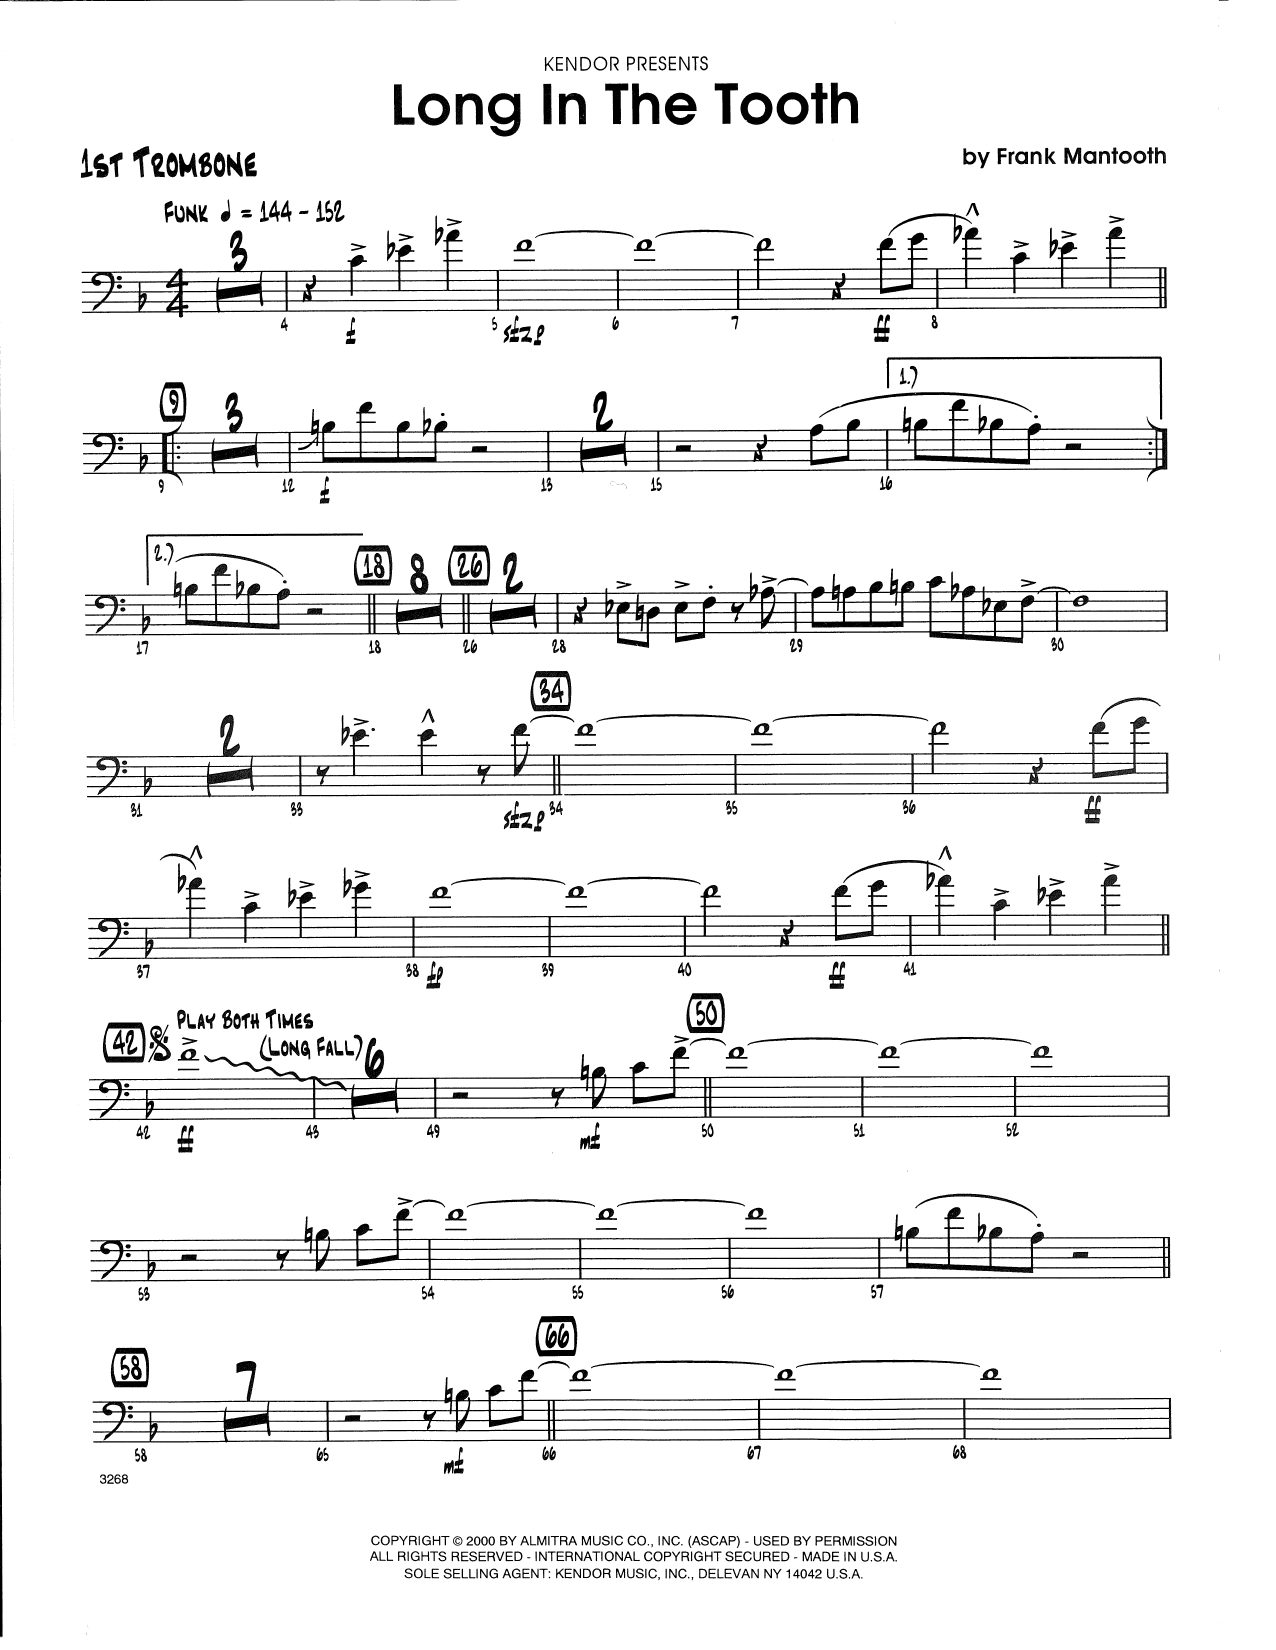 Download Frank Mantooth Long In The Tooth - 1st Trombone Sheet Music